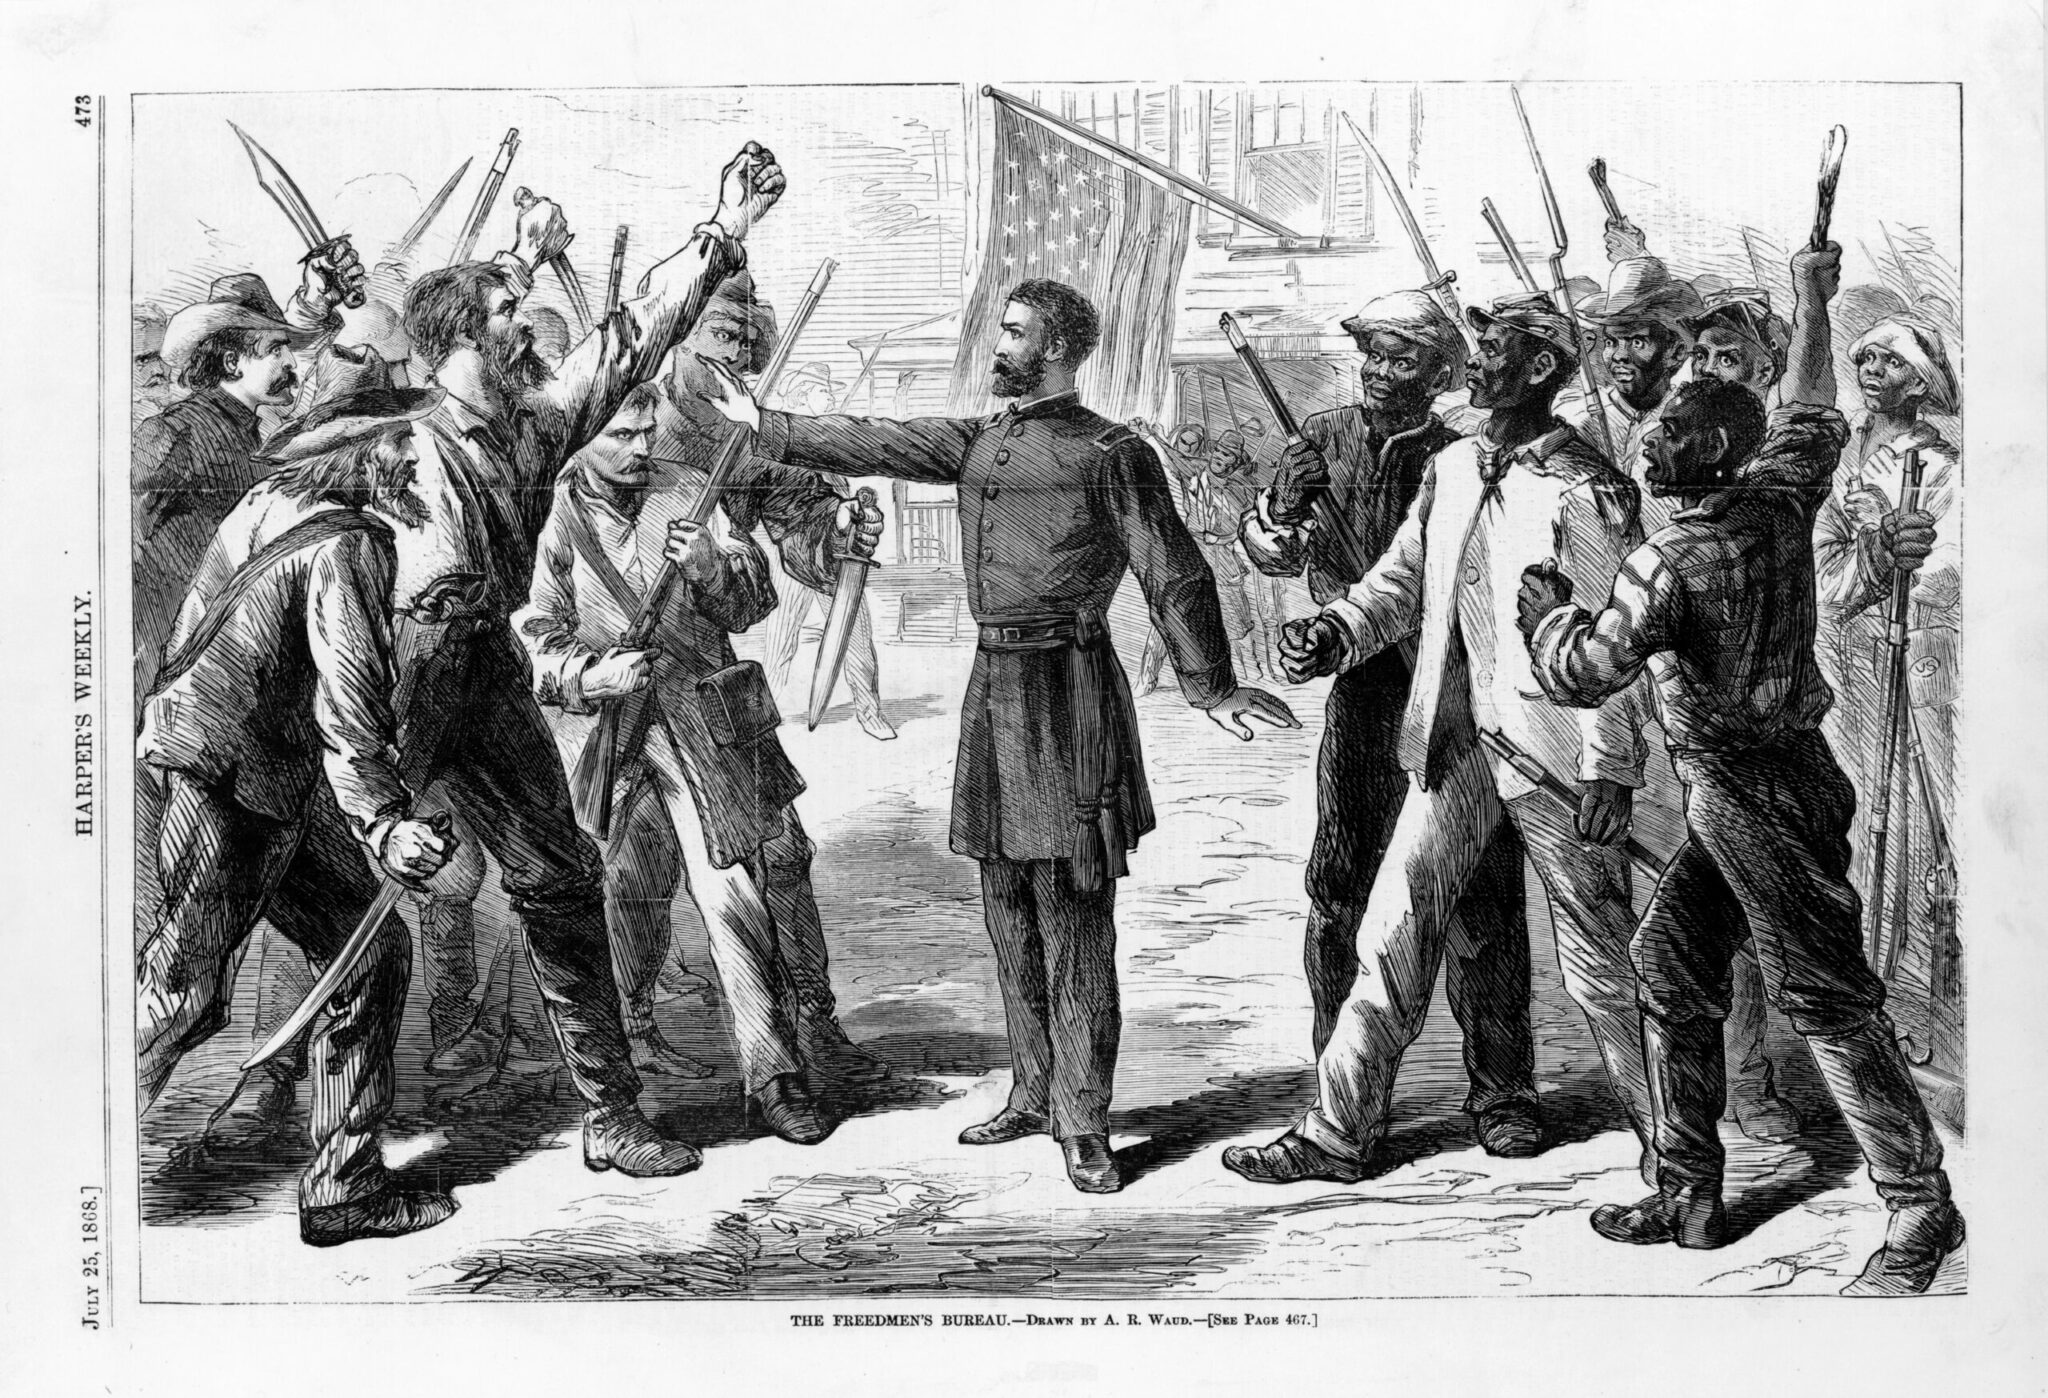 what protections did the freed slaves have after the amendments to the united states constitution scaled